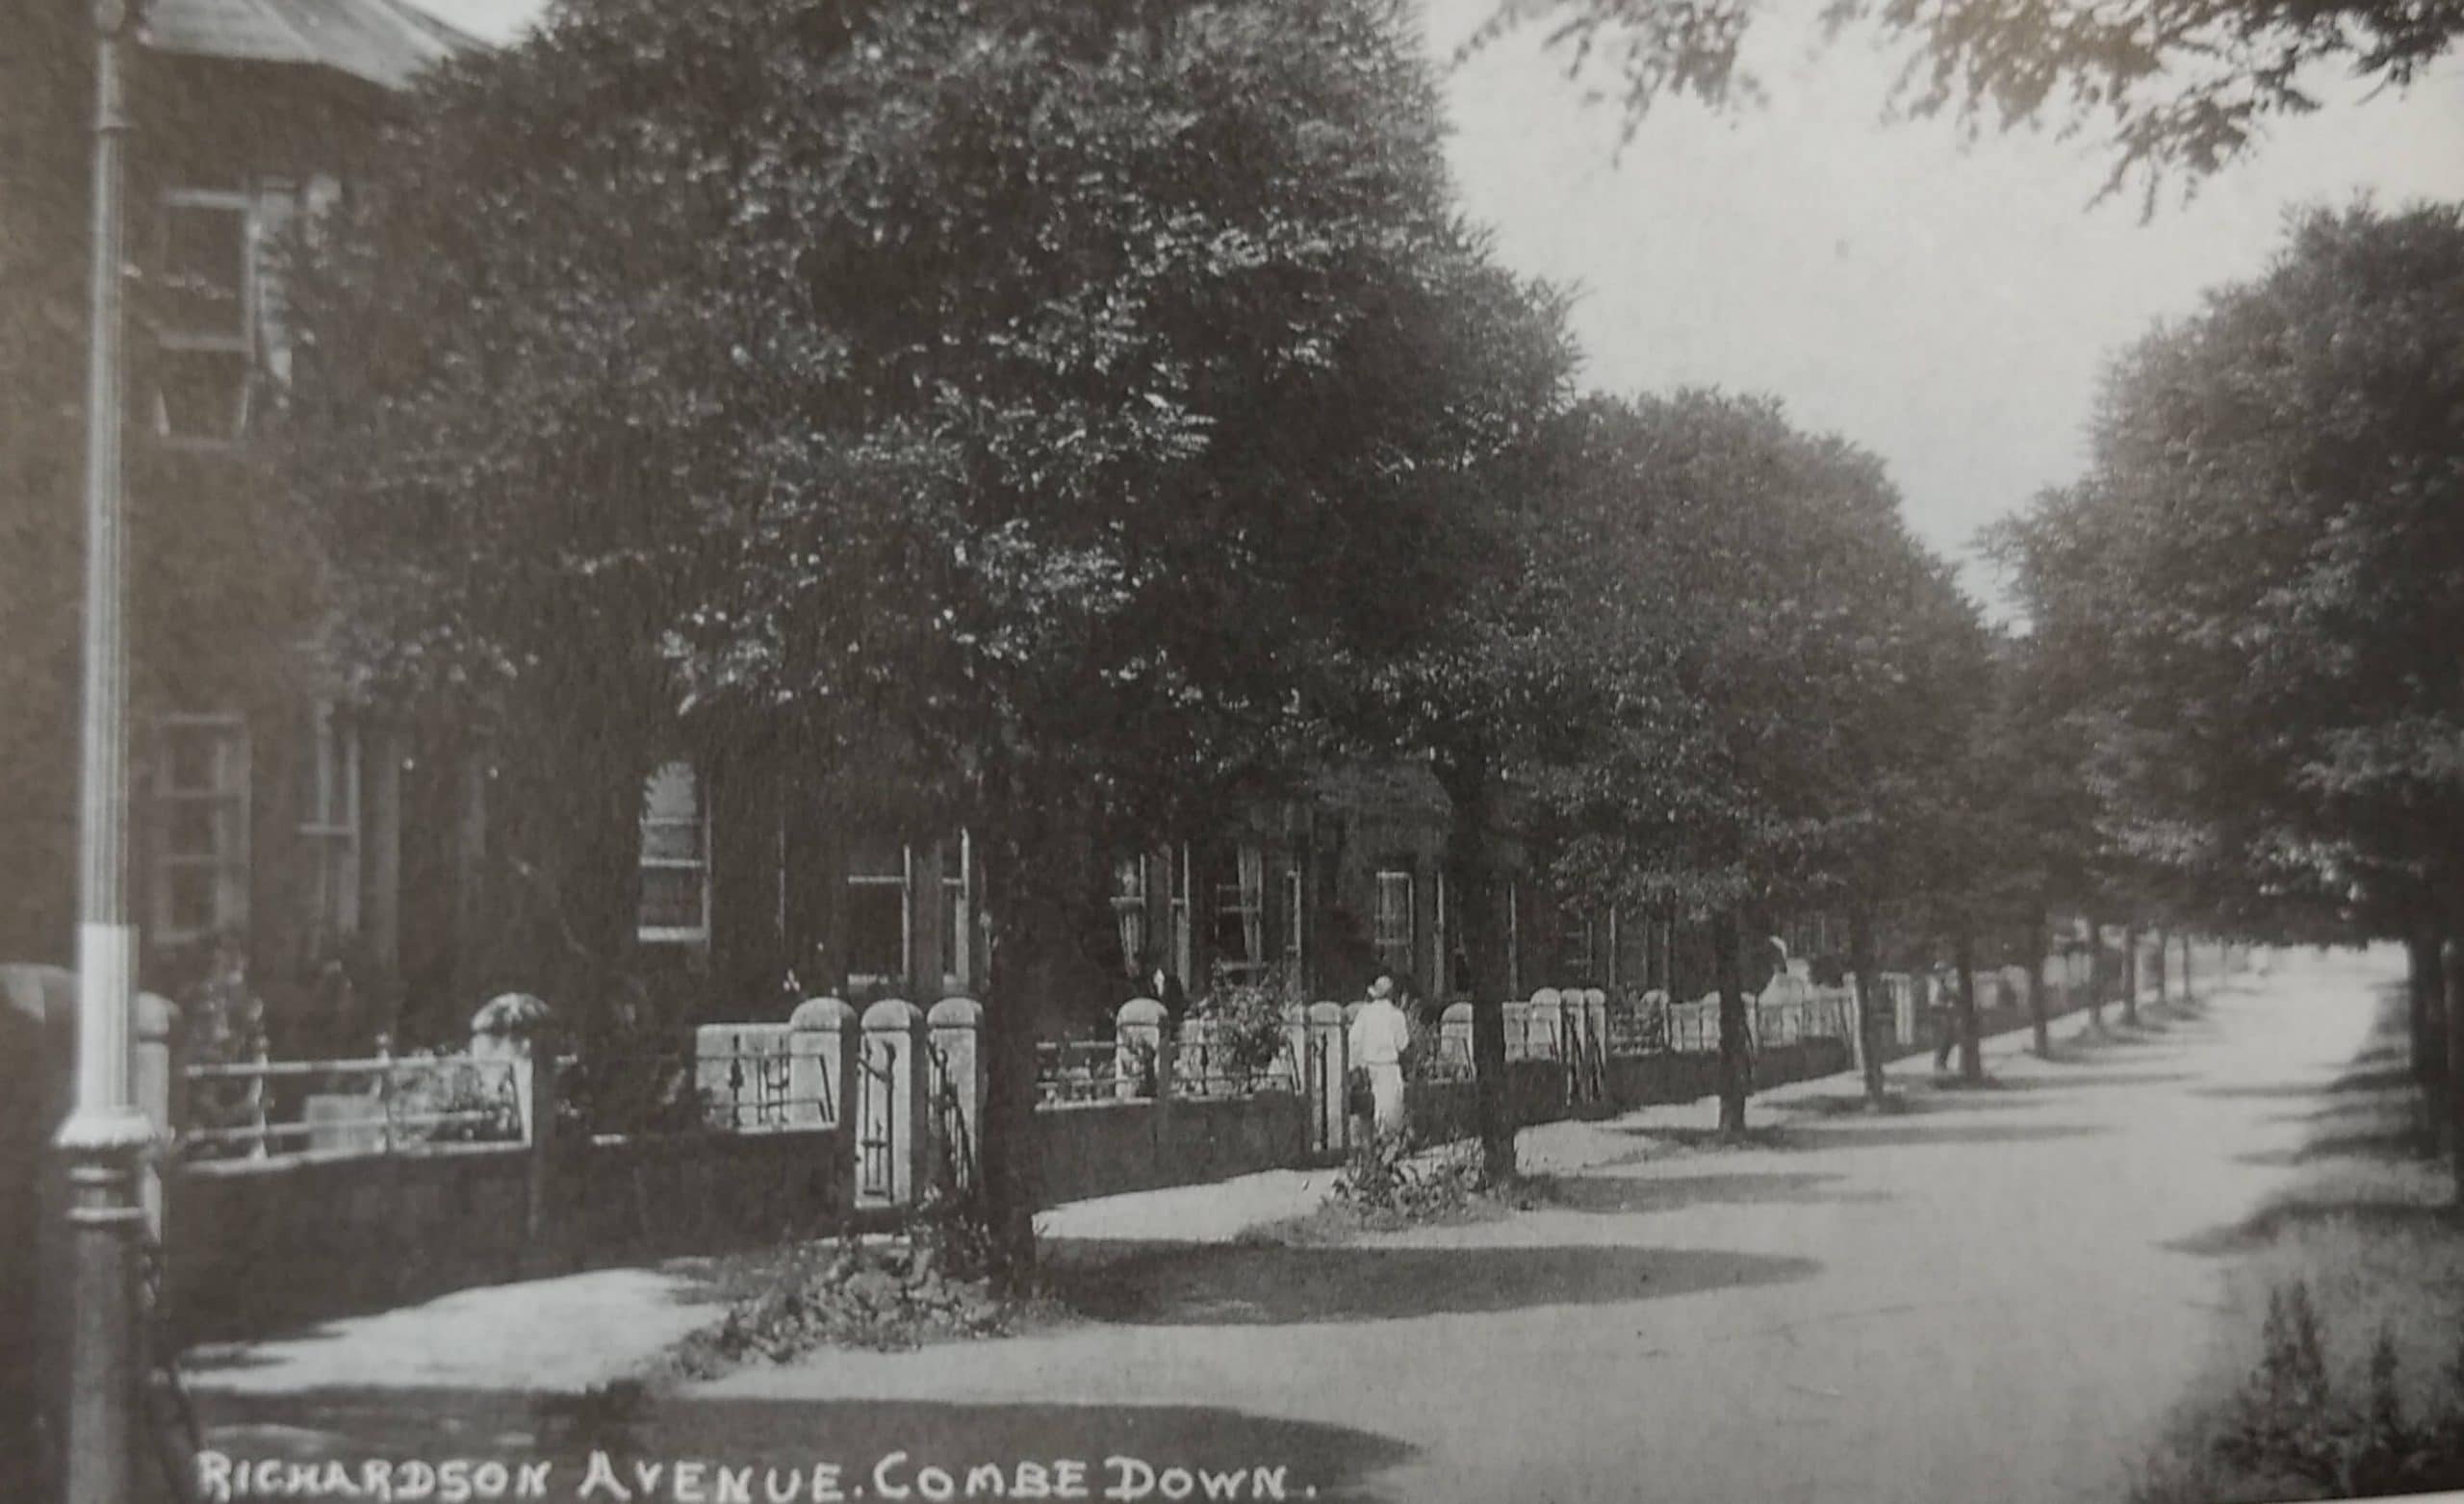 Richardson Avenue (now The Firs), Combe Down about 1920